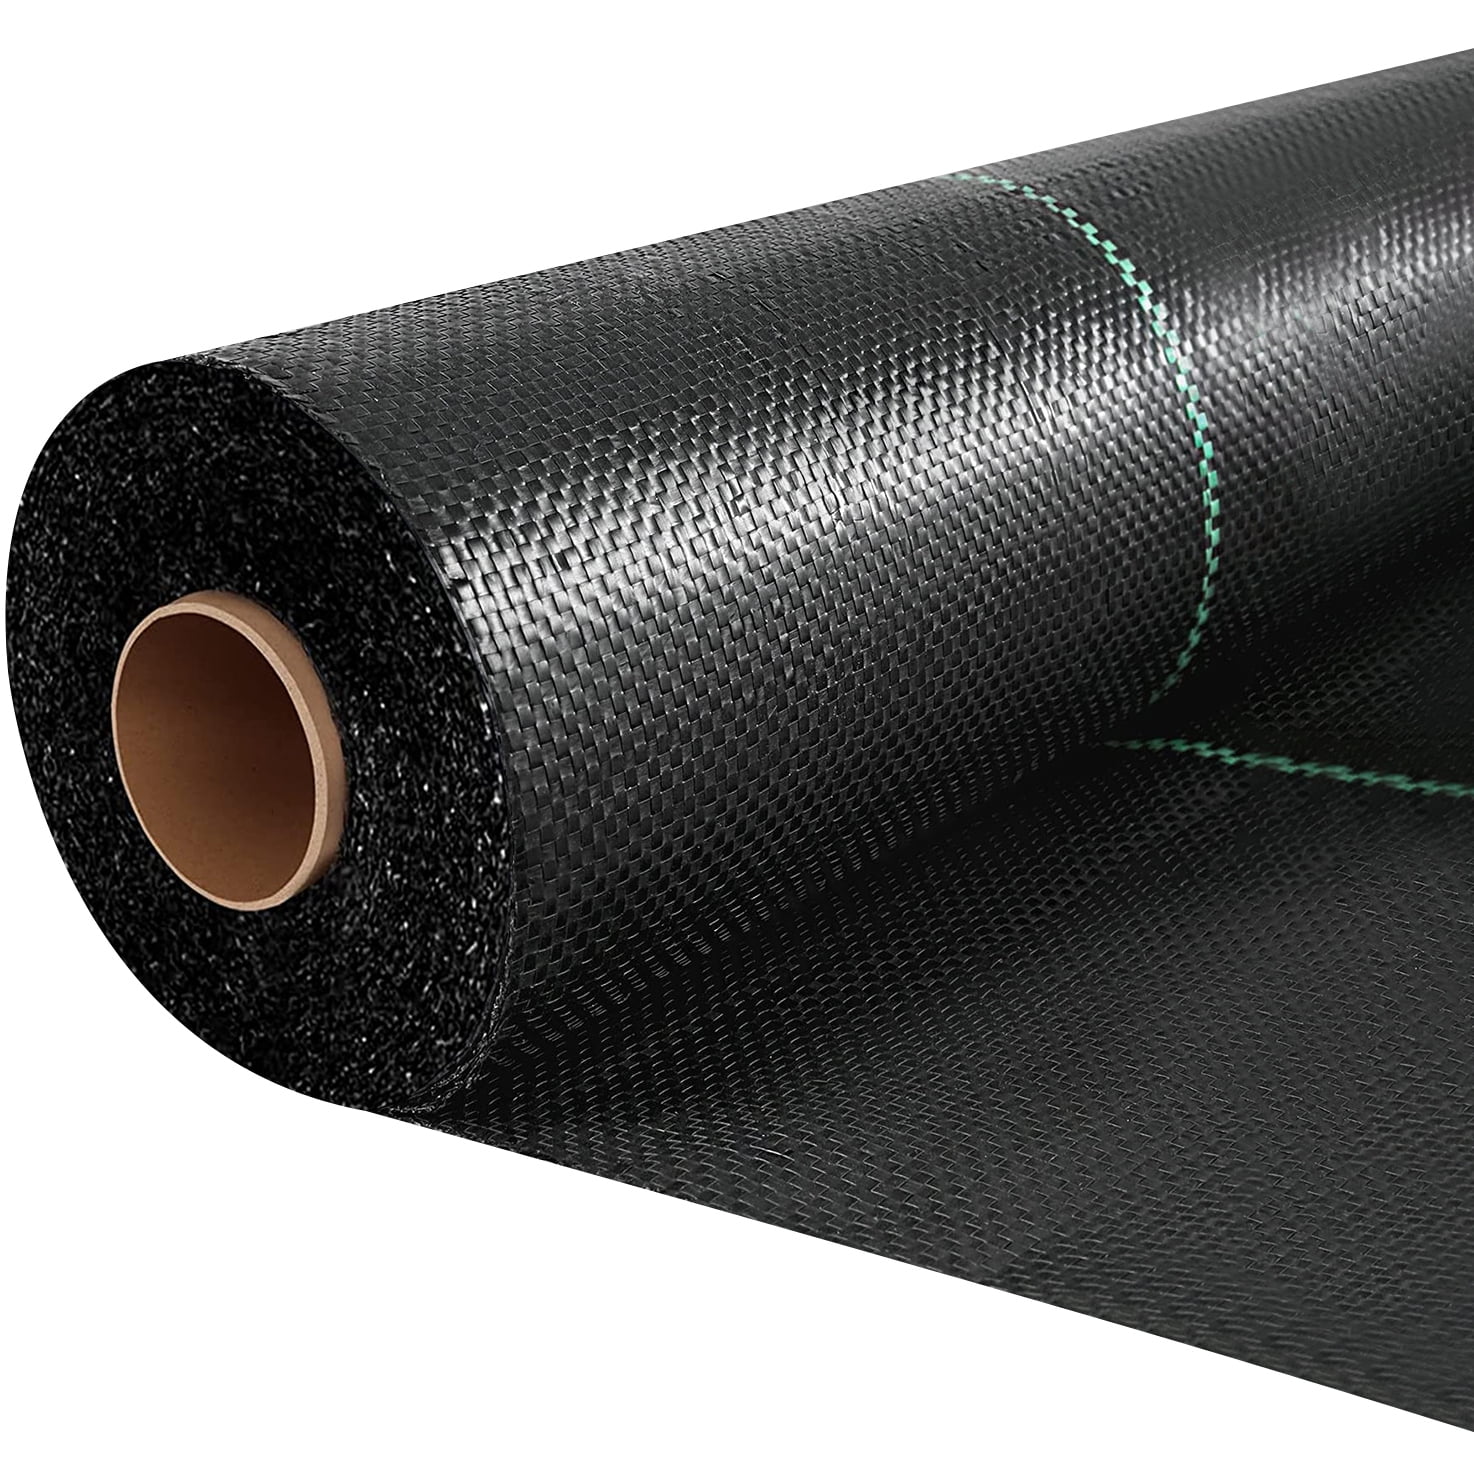 Landscaping Black VEVOR Geotextile Fabric Heavy Duty Underlayment for Soil Stabilization 12.5 x 30 ft 3.5oz Woven PP Driveway Drain Cloth w/ 600lbs Tensile Strength Weed Barrier 